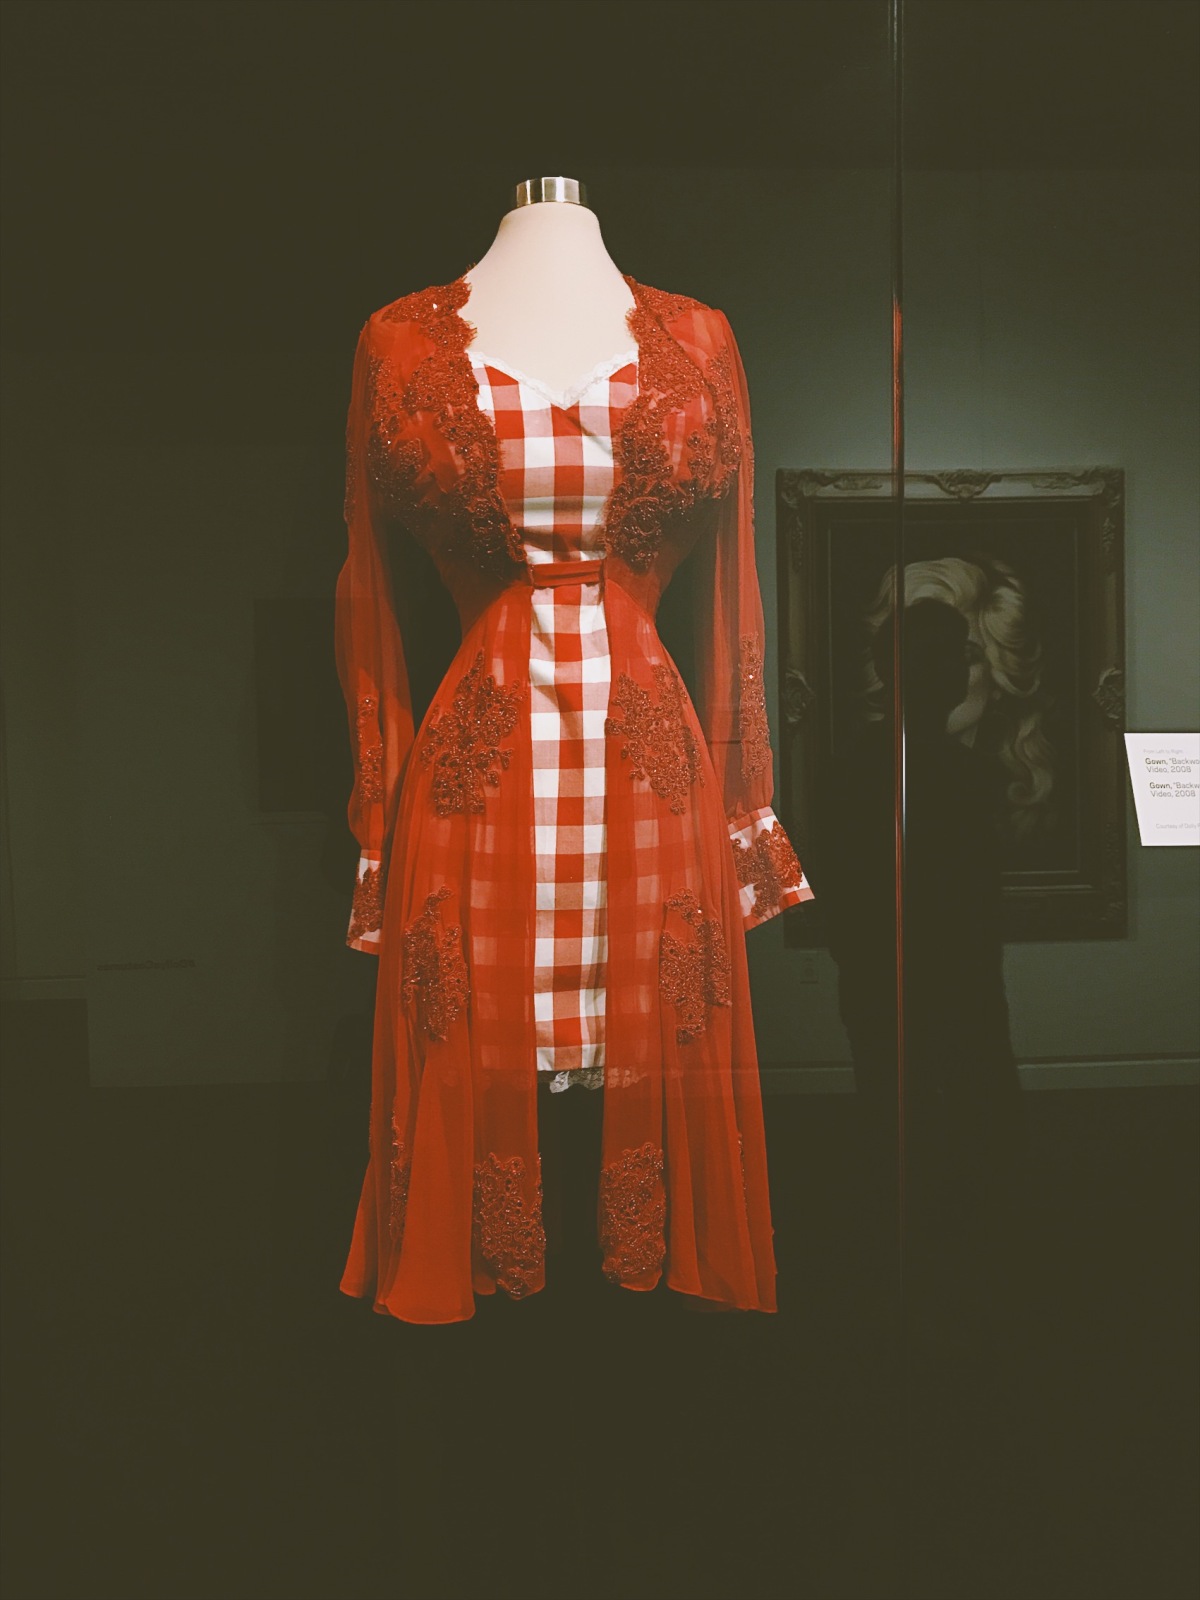 Grammy Museum, Grammys, Dolly Parton, Dolly Parton fashion, Dolly Parton style, MusicCares, Grammy Lifetime Achievement, Dolly Parton costumes, singer, singer style, touring style, on stage style